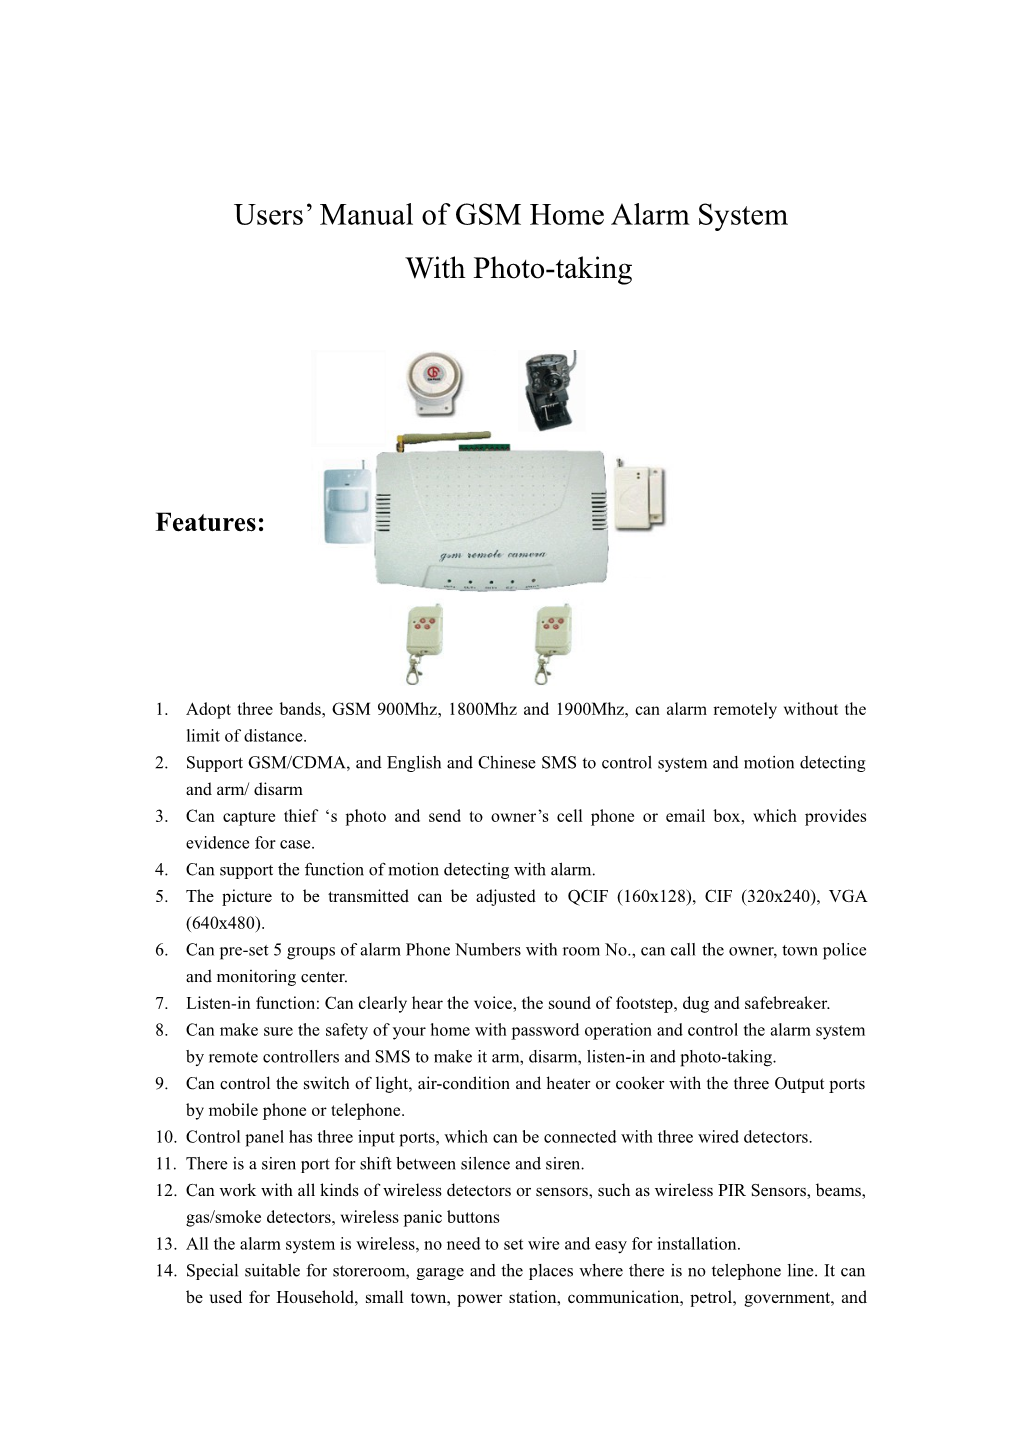 Users Manual of GSM Home Alarm System with Photo-Taken